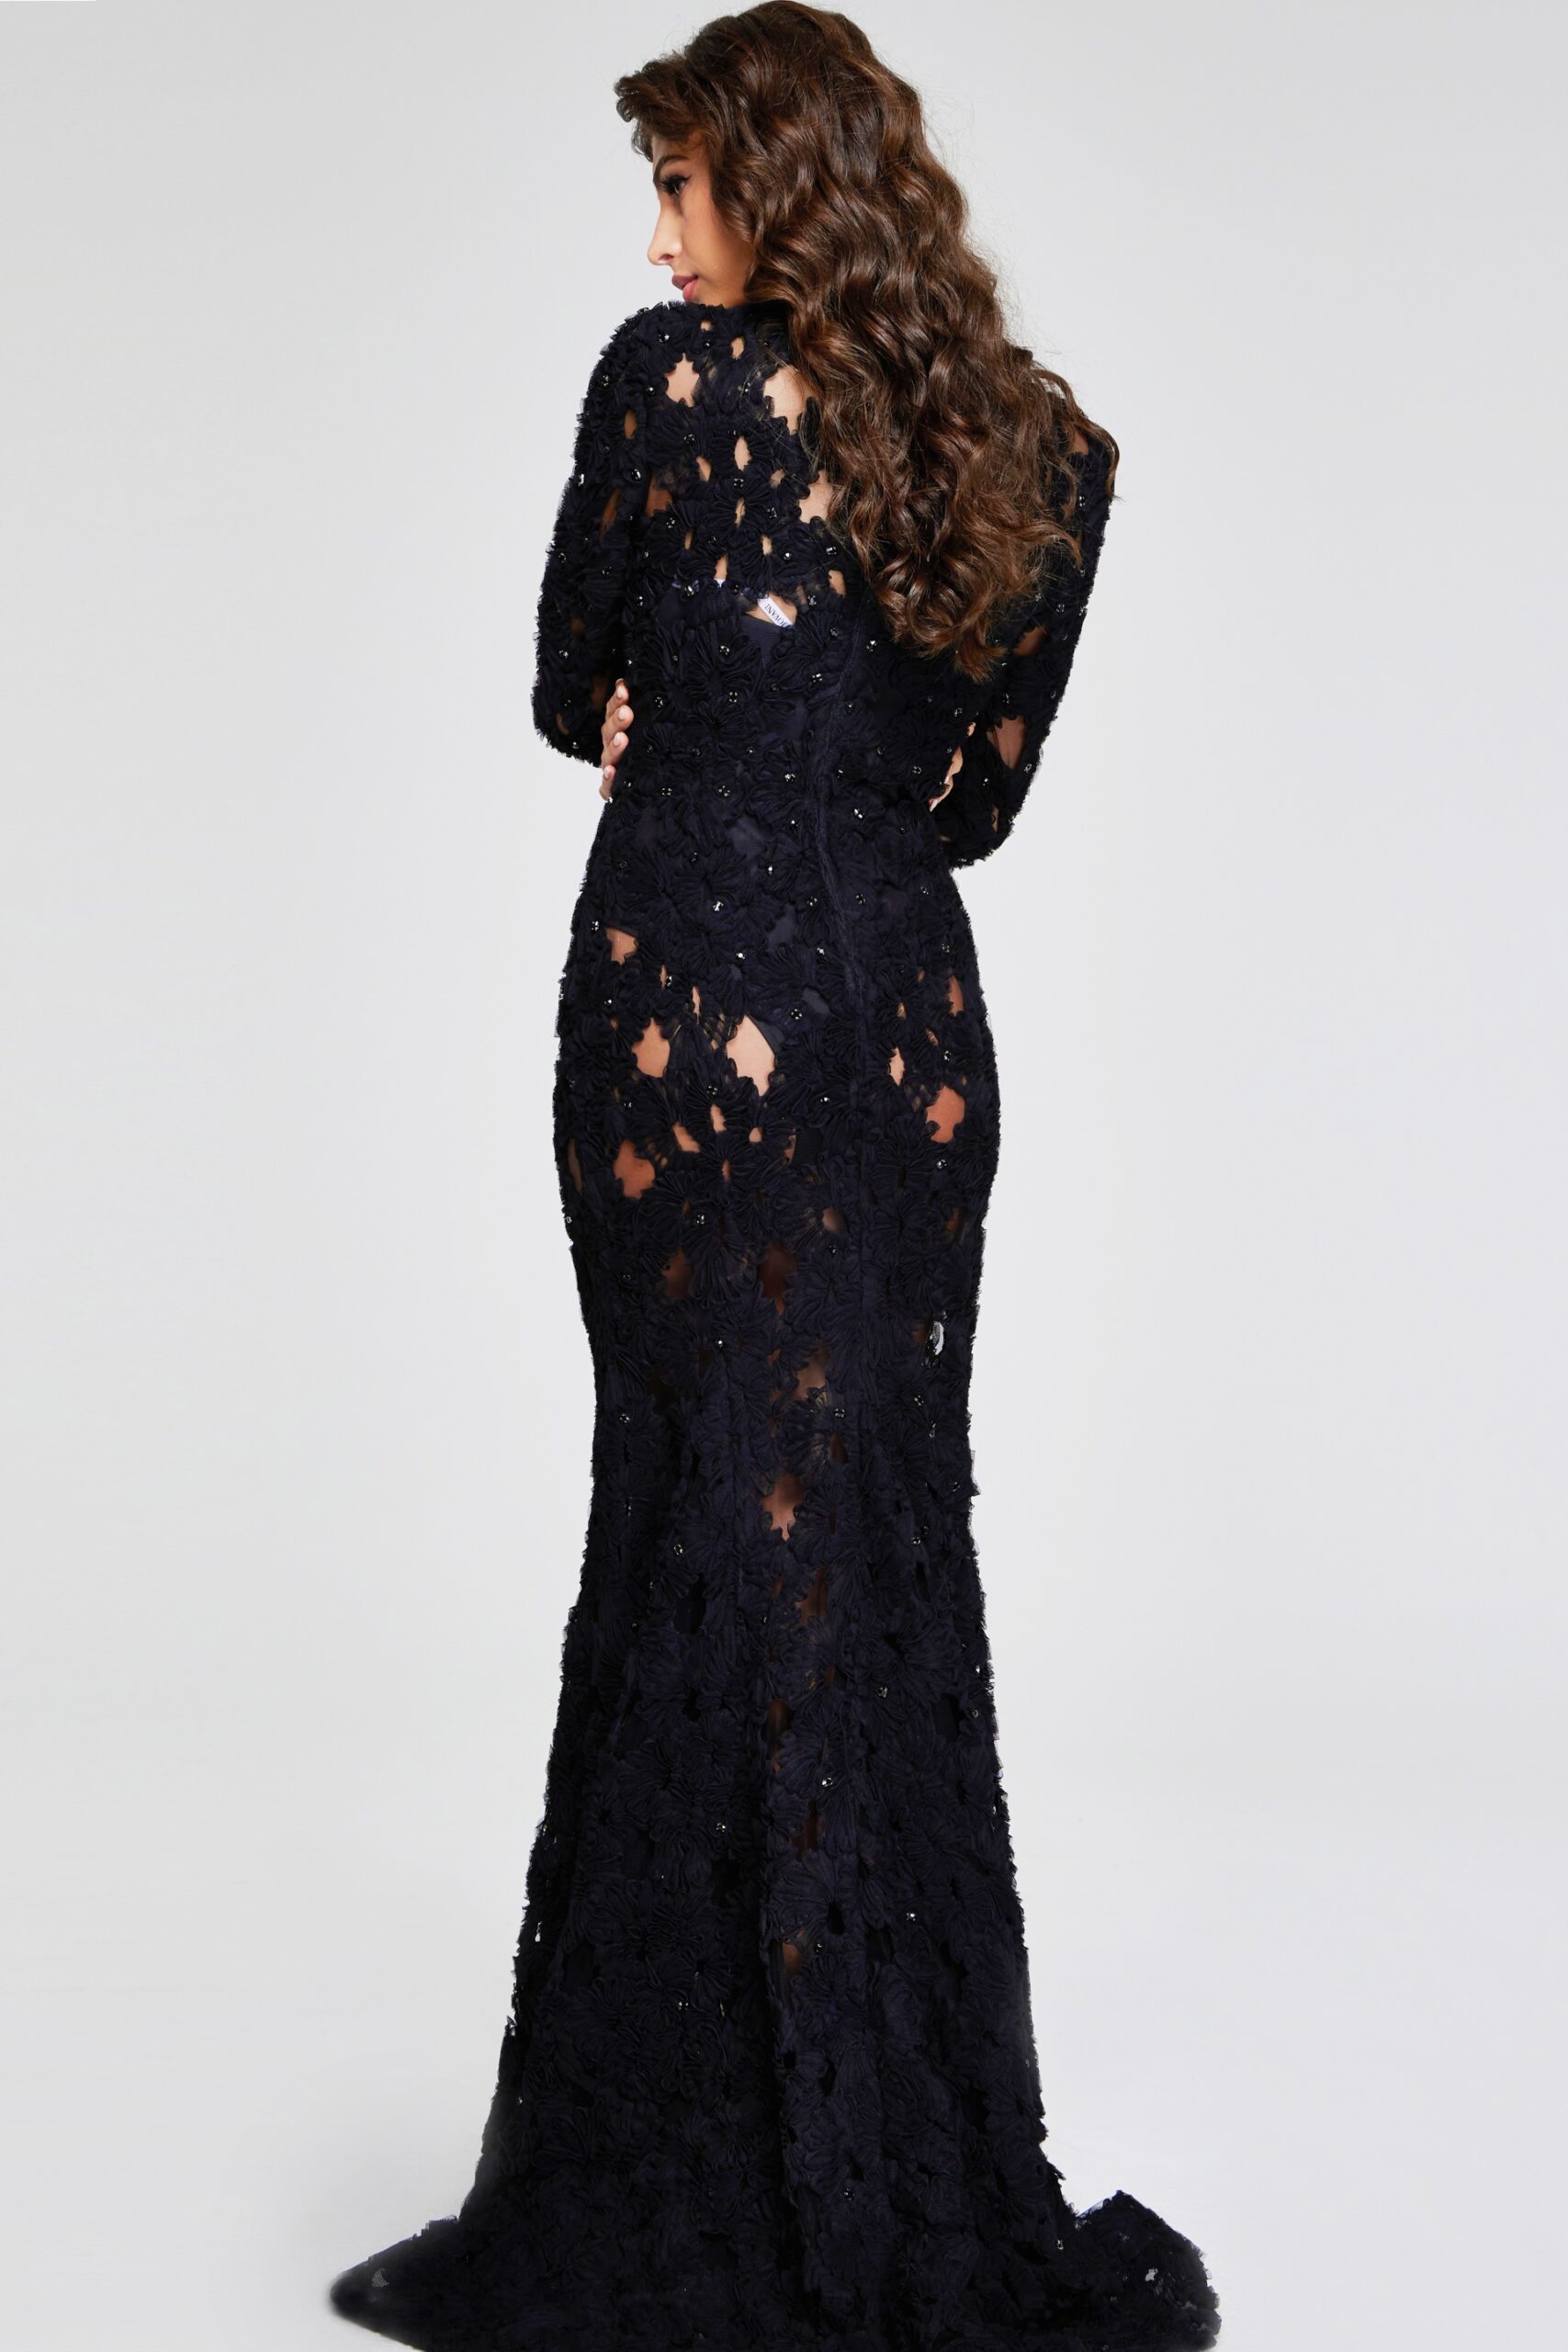 Elegant Black Lace Gown with Intricate Floral Cutouts 40743